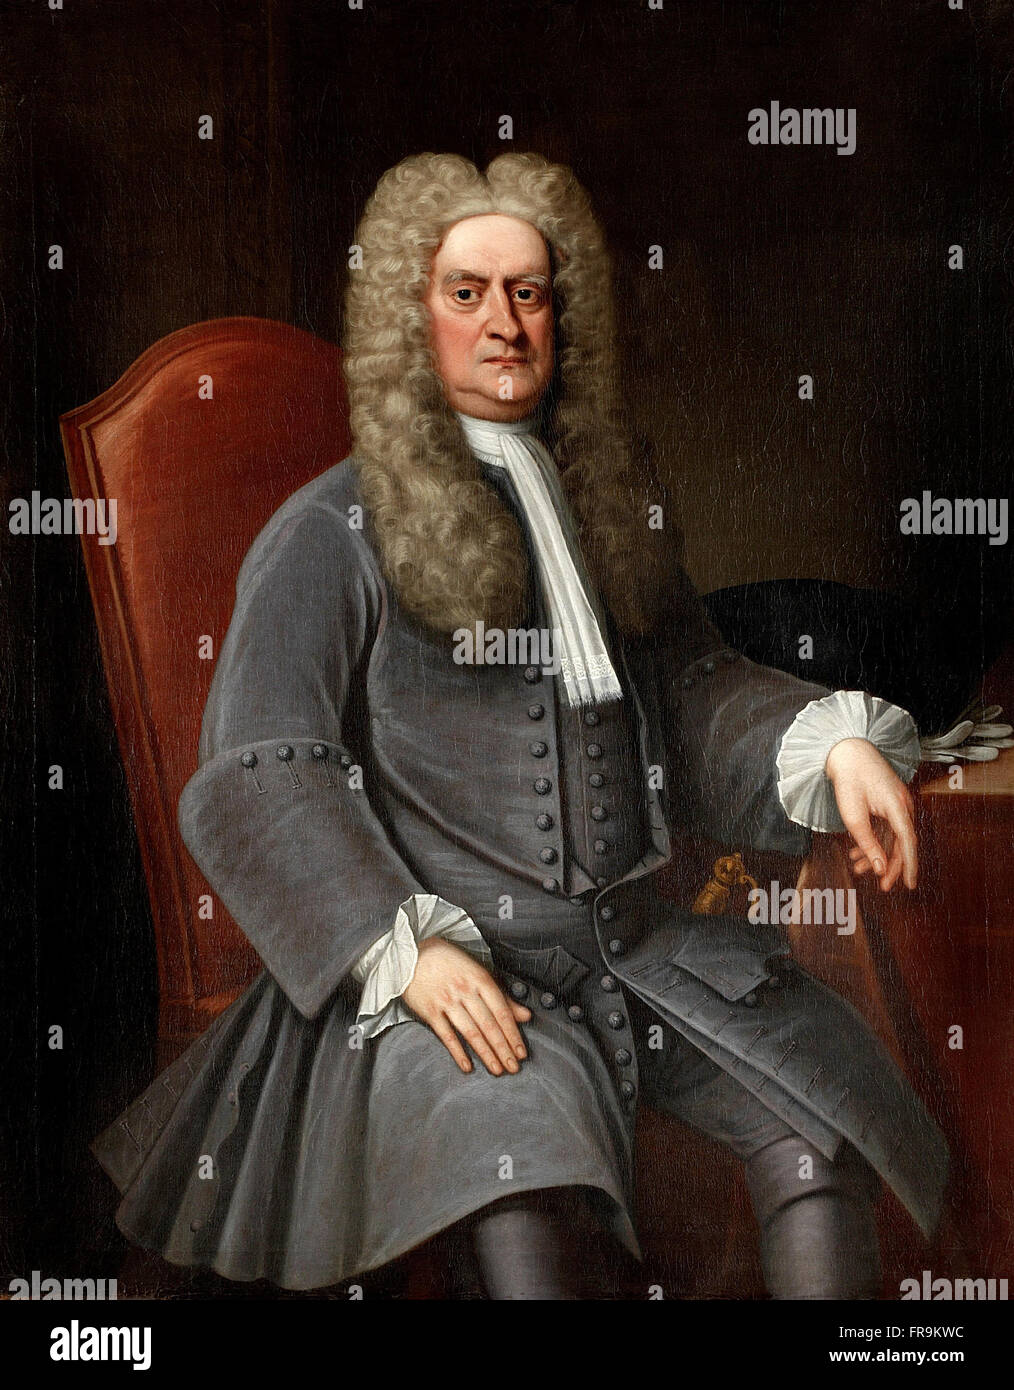 Portrait of Sir Isaac Newton, oil on canvas [M. Keynes, Iconography of Sir Isaac Newton, X]. Seen here between 1715 to 1720.  Sir Isaac Newton PRS -  25 December 1642 – 20 March 1726/27 was an English physicist and mathematician who is widely recognised as one of the most influential scientists of all time and a key figure in the scientific revolution, Stock Photo